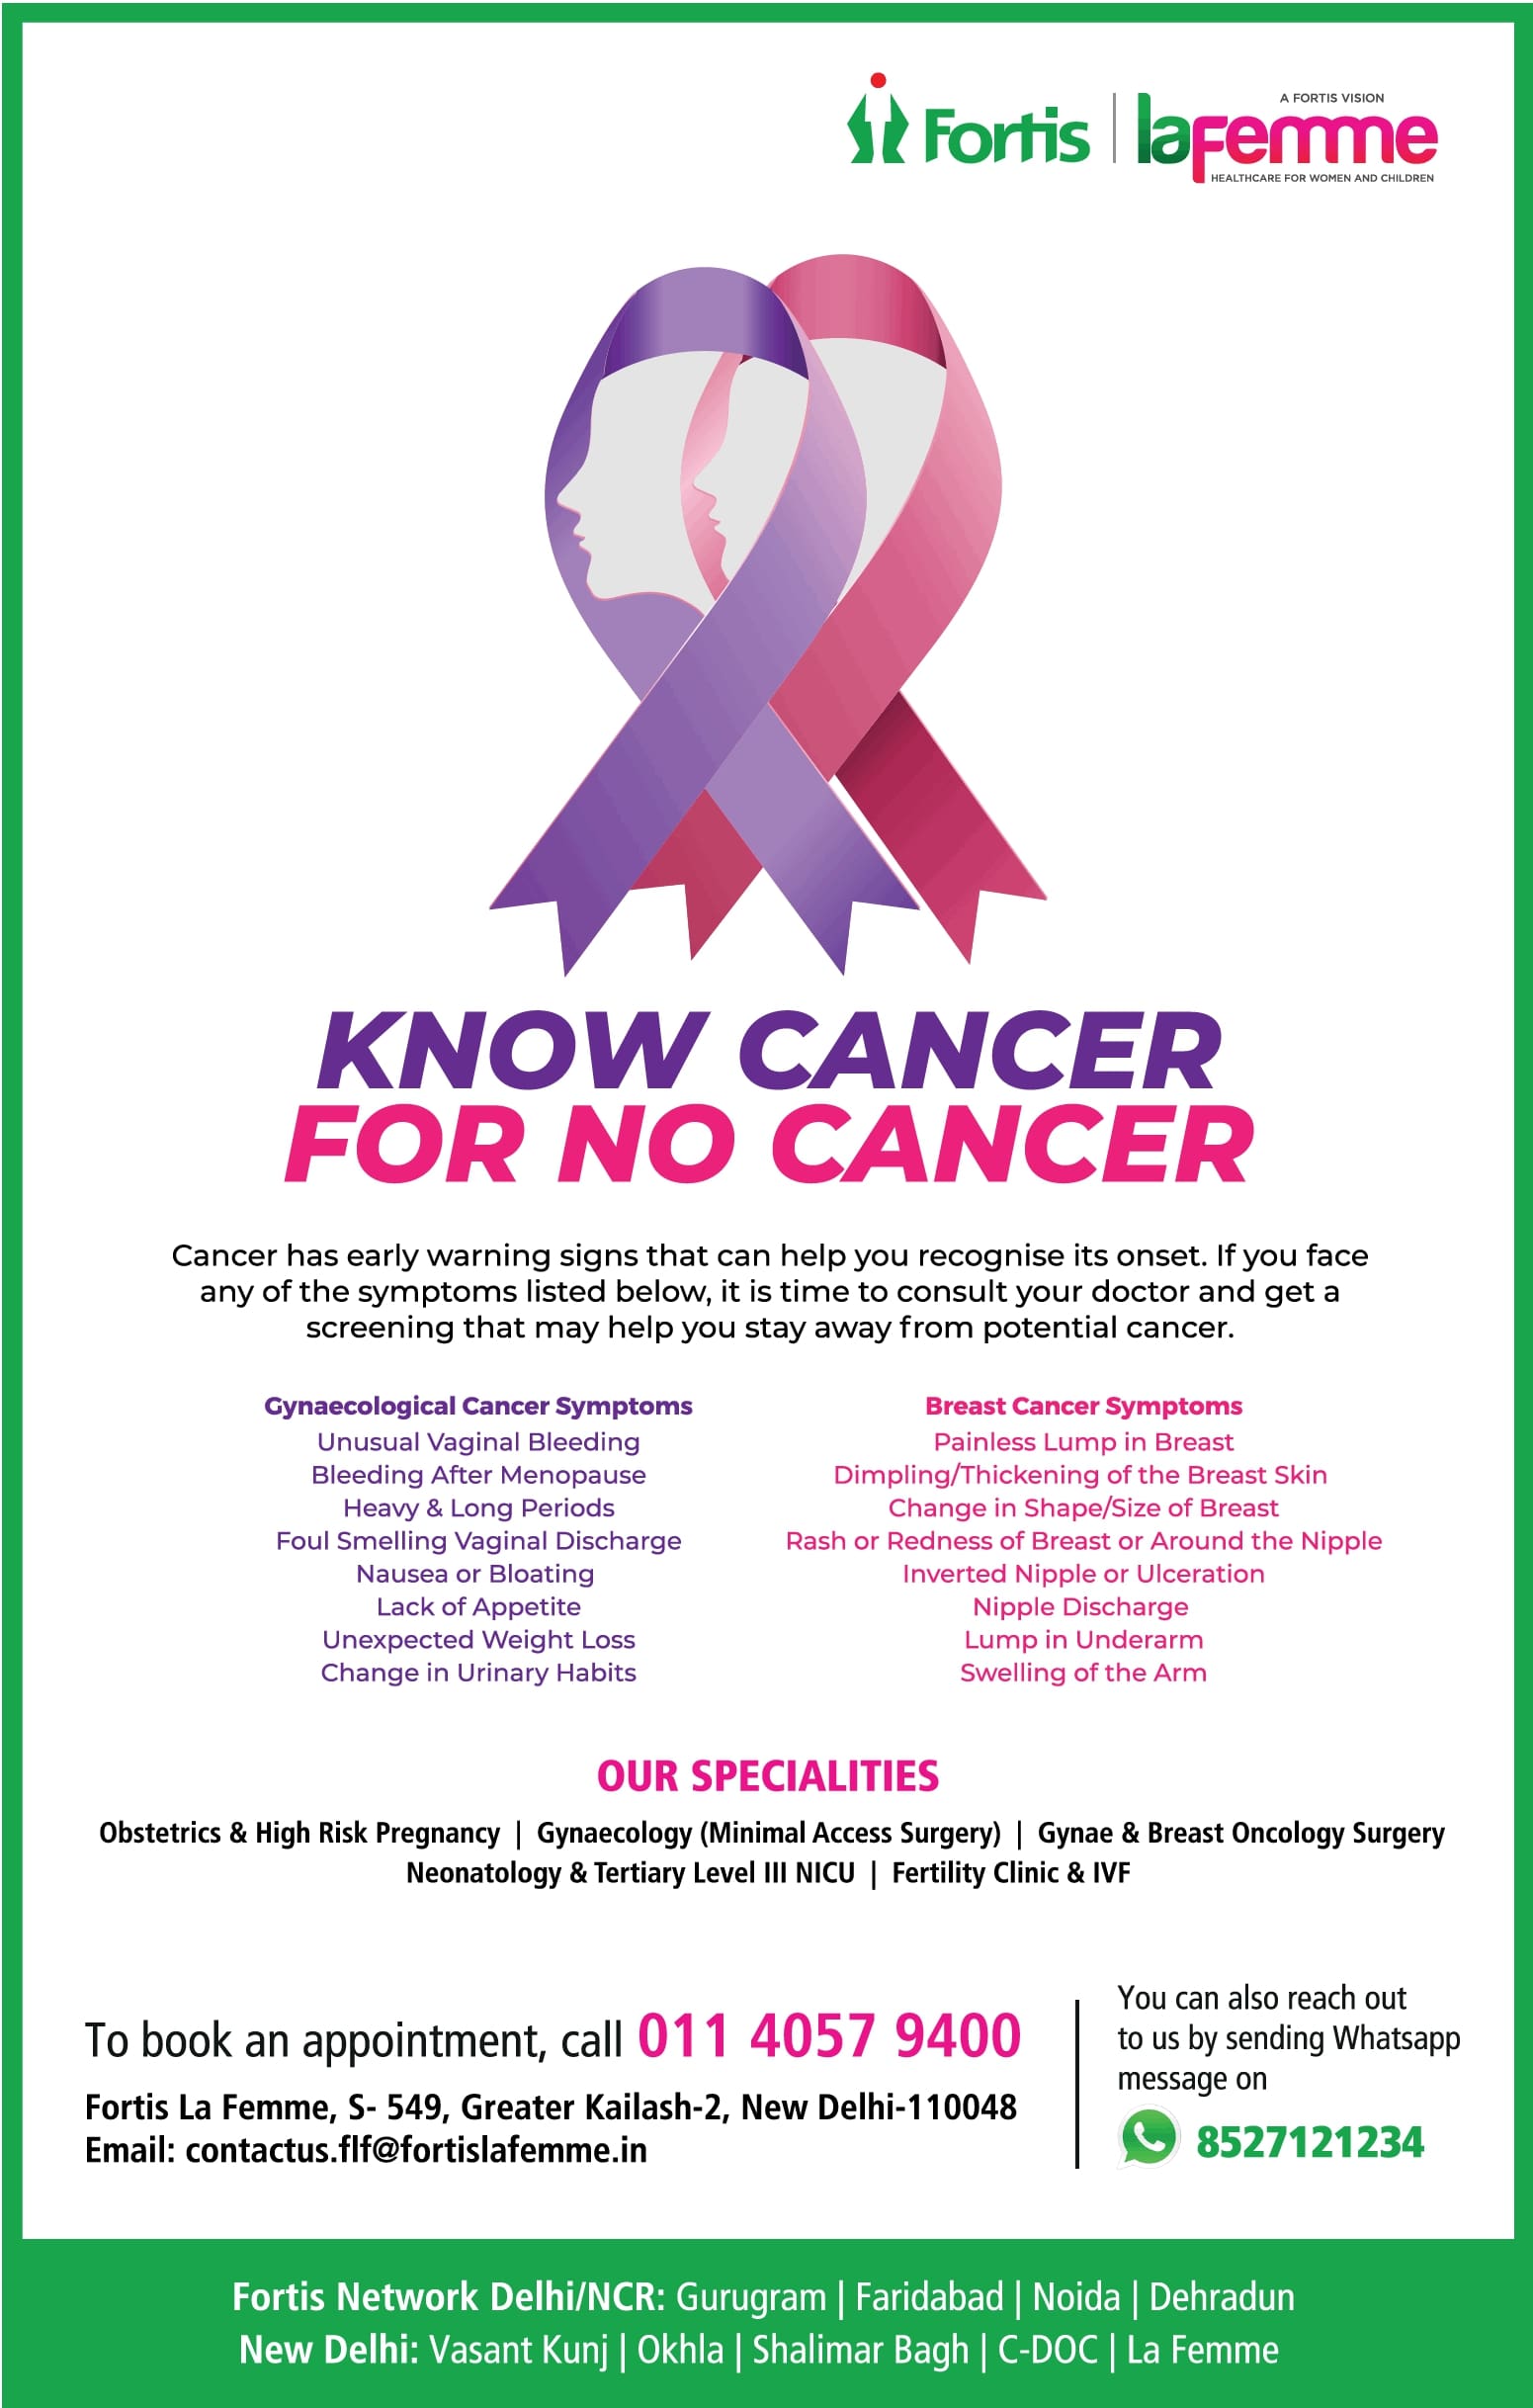 fortis-laferme-know-cancer-for-no-cancer-ad-delhi-times-11-04-2021